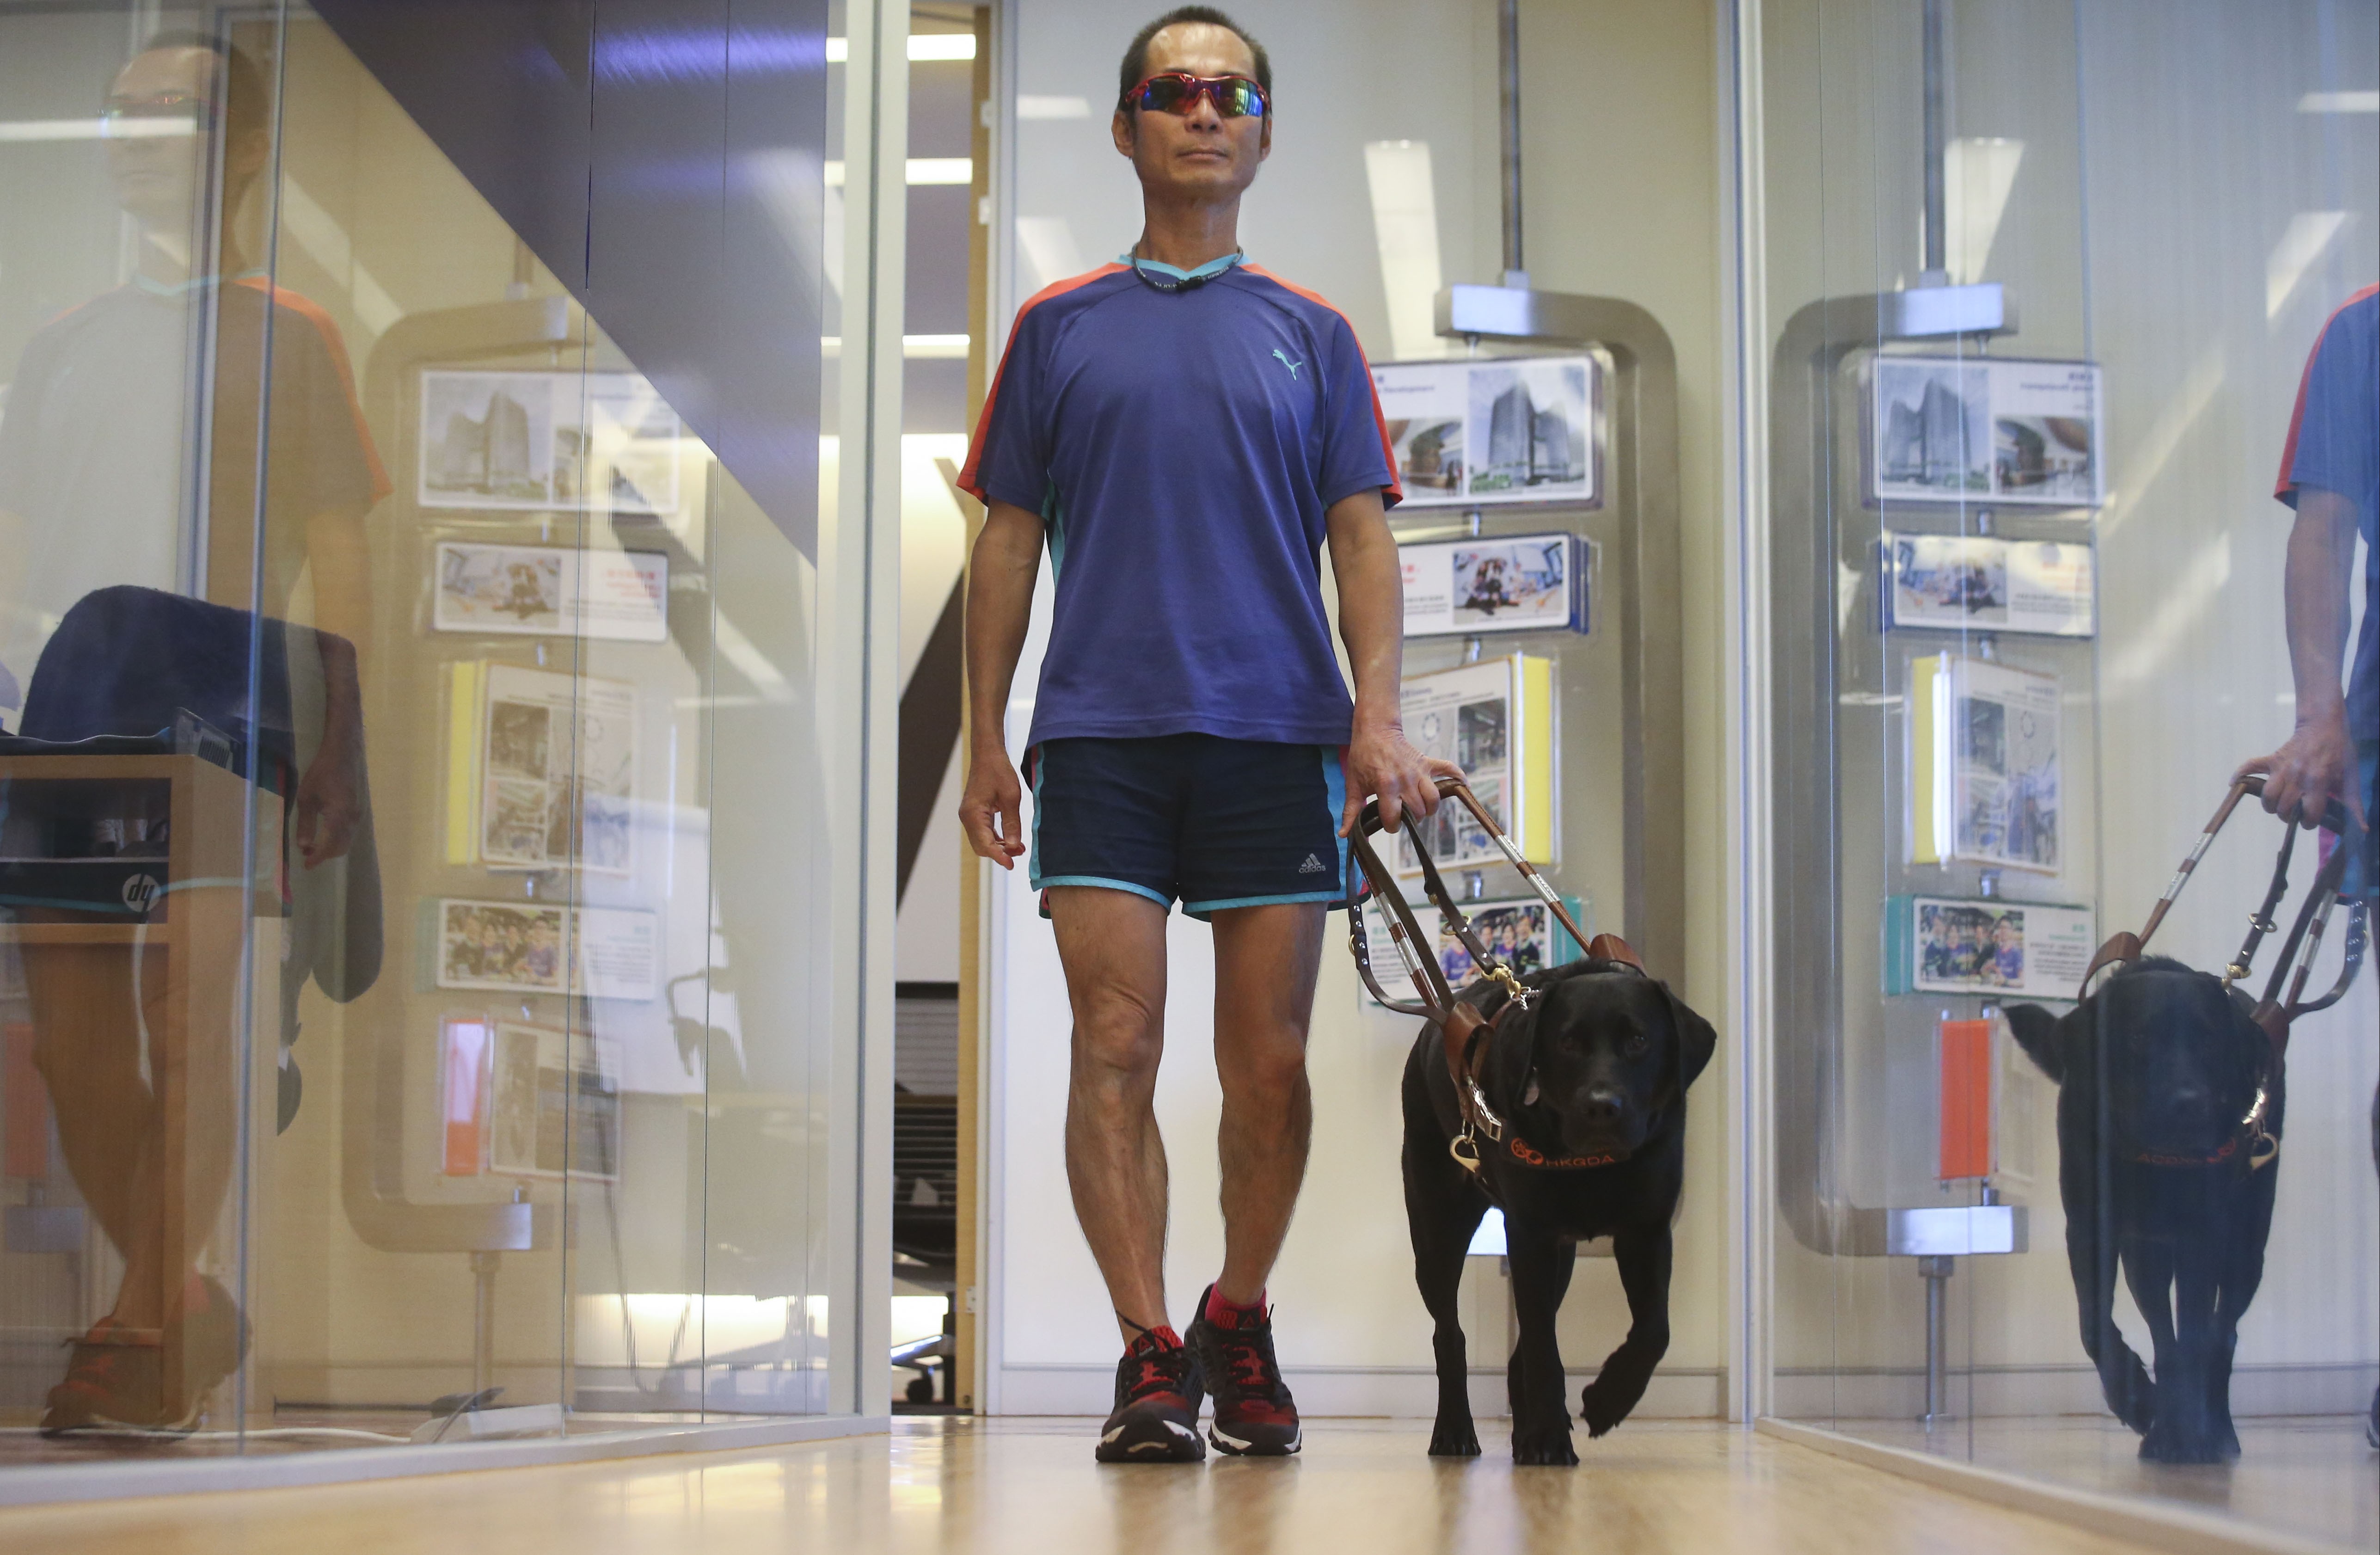 Blind athlete Gary Leung says owning a guide dog has greatly improved his standard of living. Photo: K. Y. Cheng